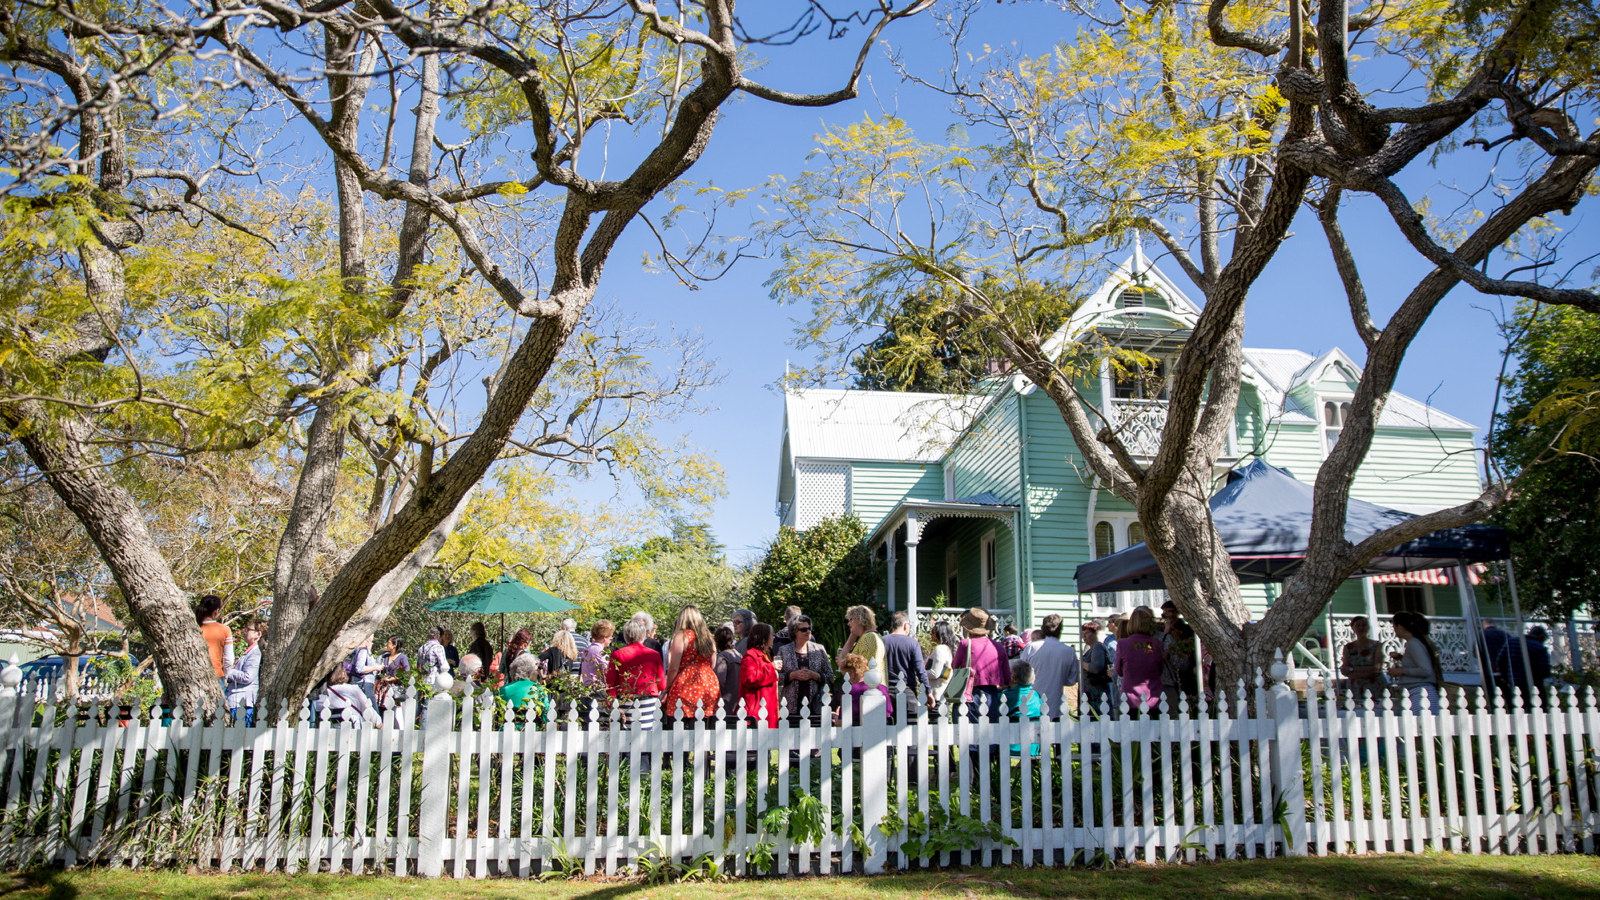 Large gathering in garden around wooden house, surrounded by white picket fence.